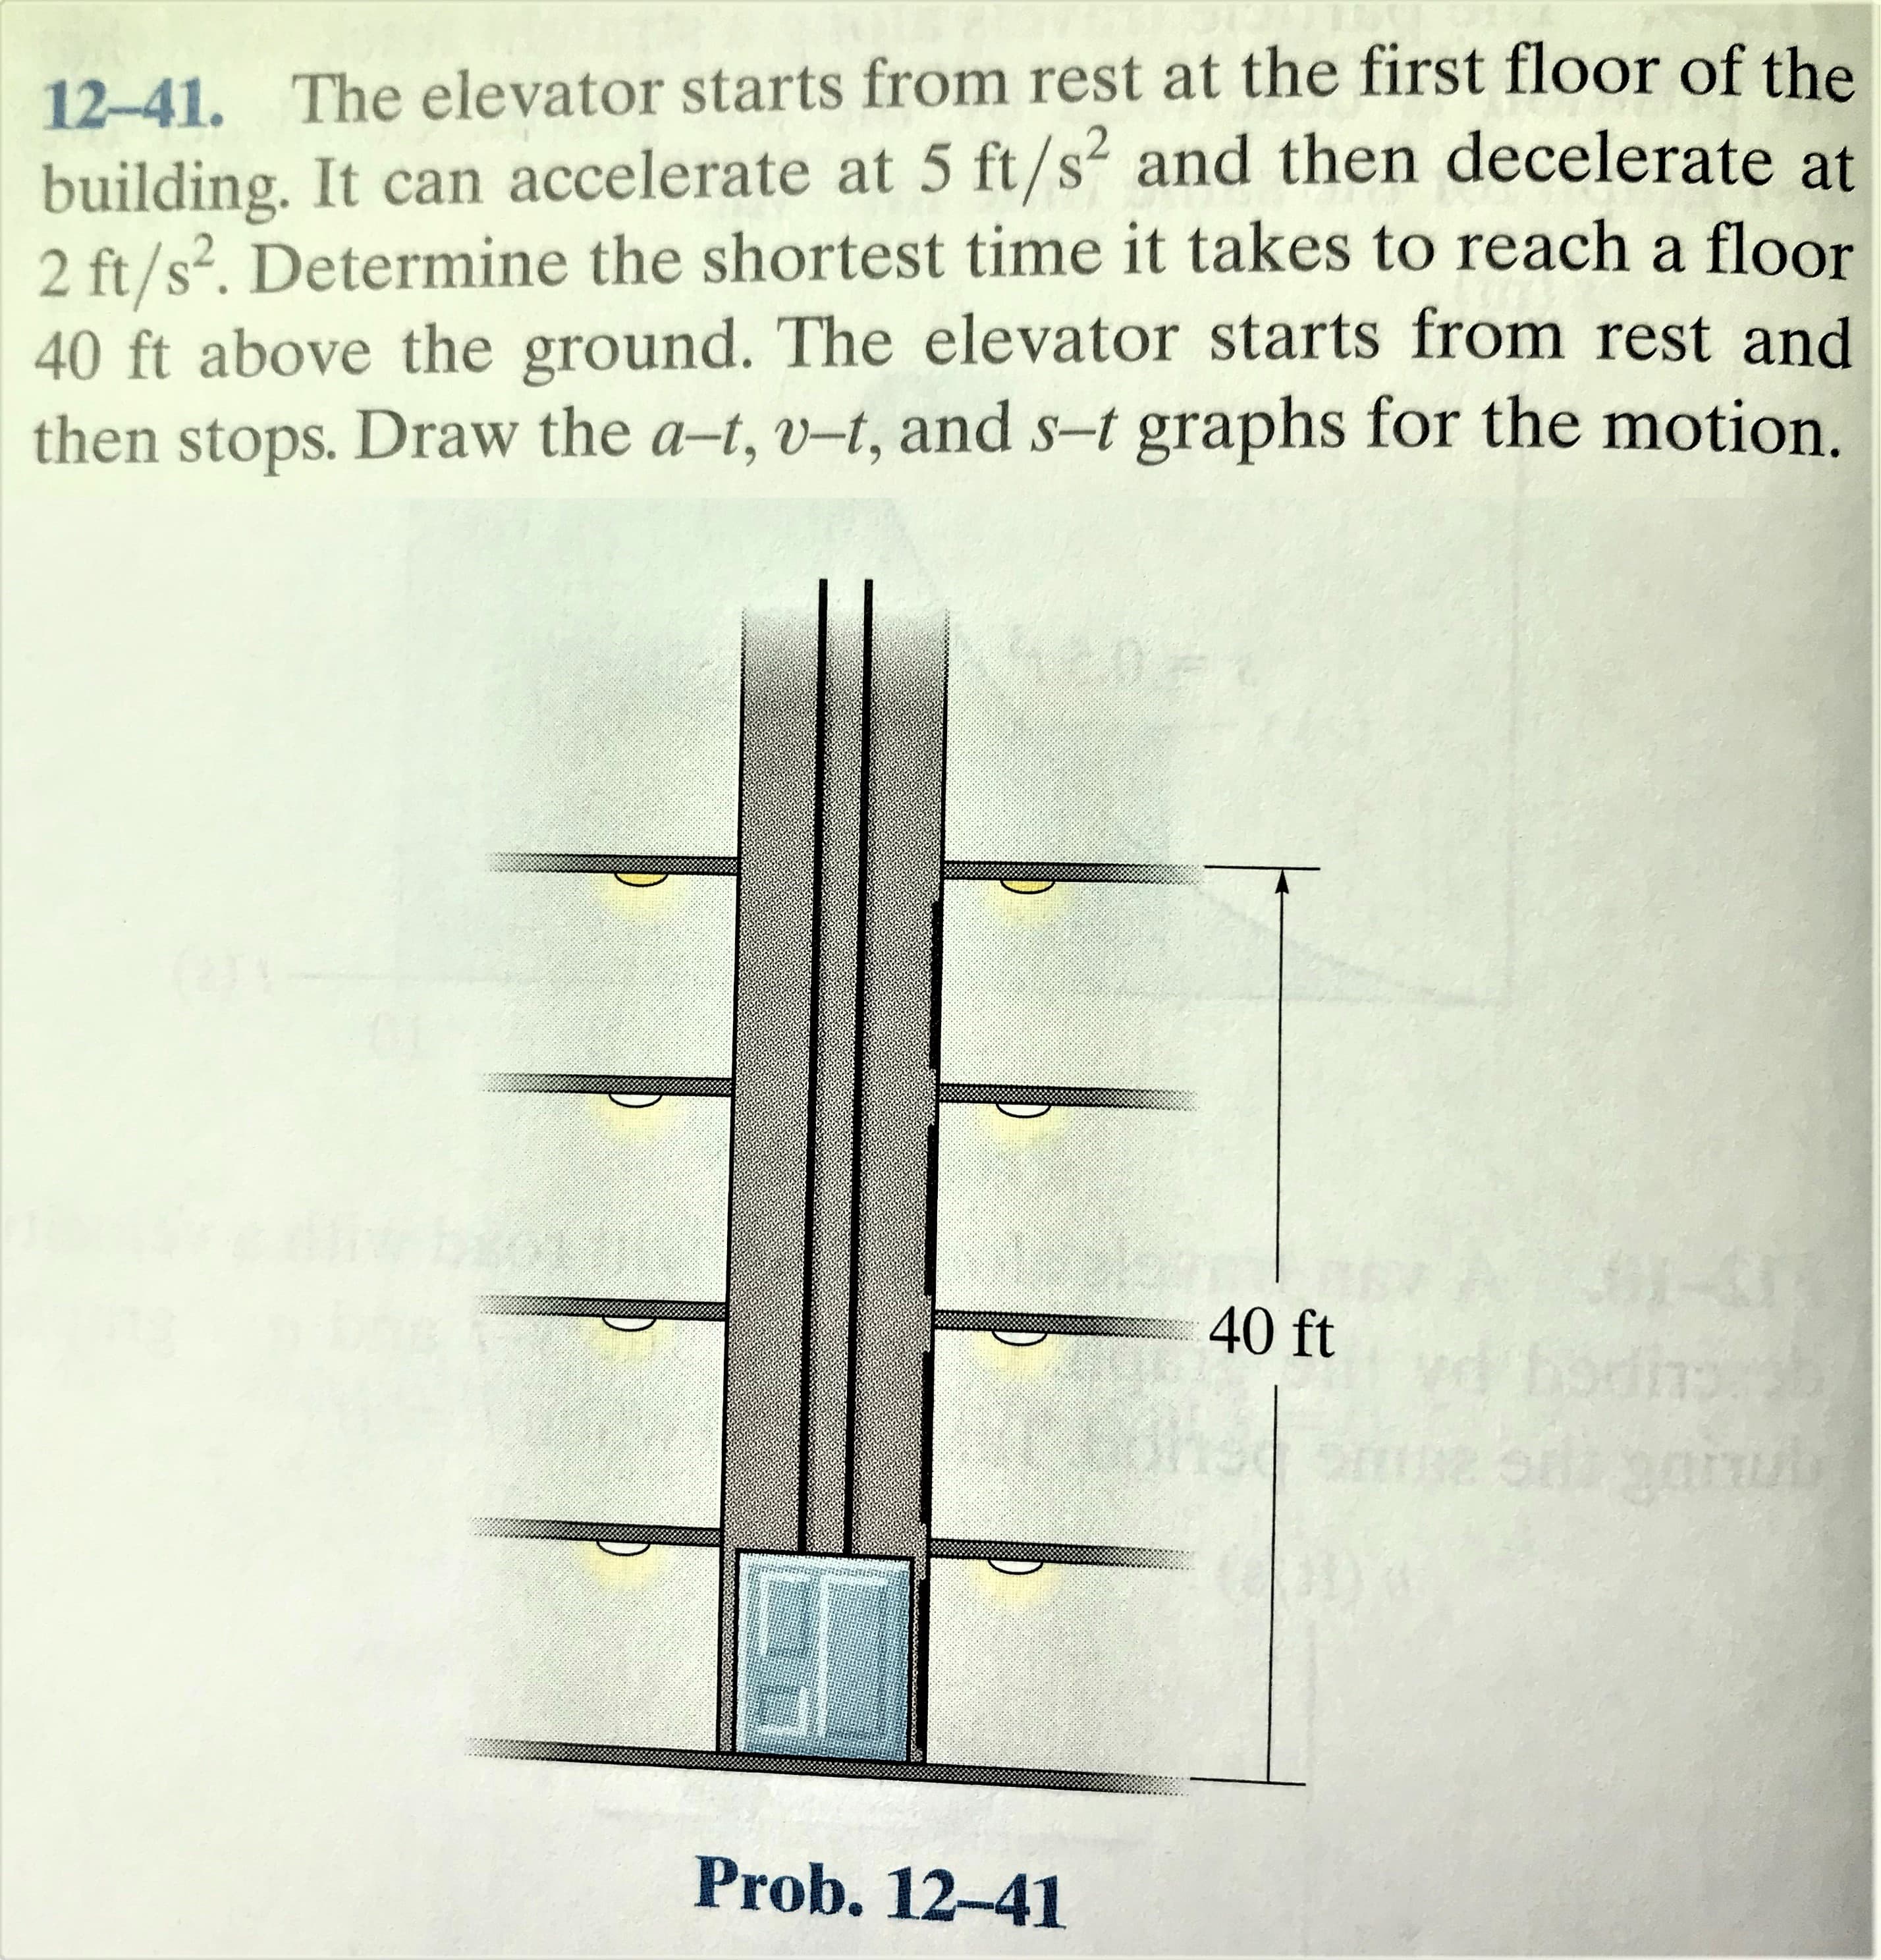 12-41. The elevator starts from rest at the first floor of the
building. It can accelerate at 5 ft/s and then decelerate at
2 ft/s². Determine the shortest time it takes to reach a floor
40 ft above the ground. The elevator starts from rest and
then stops. Draw the a-t, v-t, and s-t graphs for the motion.
heDe
01-4
hodins
ganu
40 ft
Prob. 12-41
